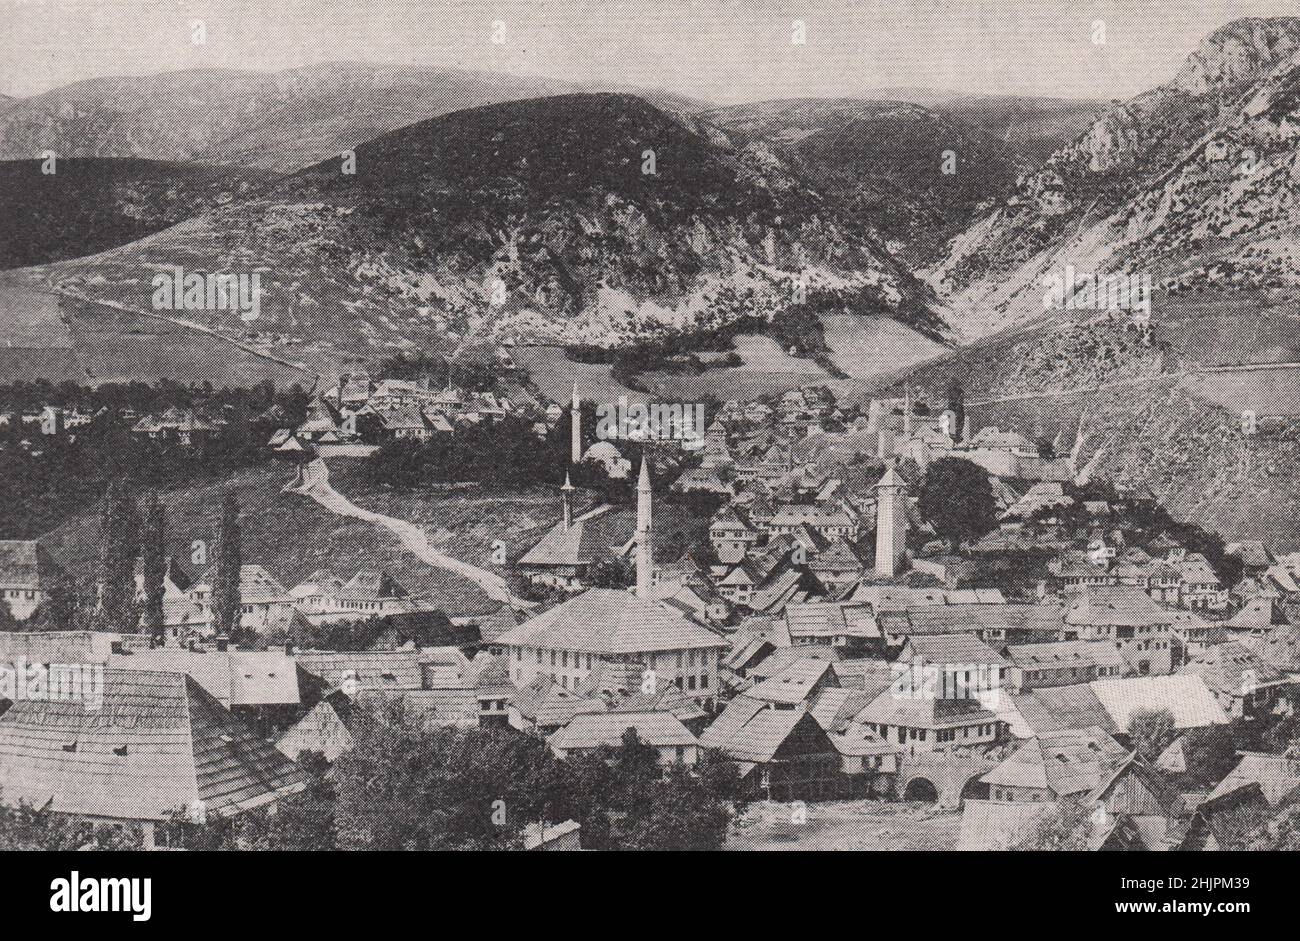 Travnik, a typical Turkish town in the Bosnian Uplands. Bosnia Herzegovina. Bosnia & Herzegovina (1923) Stock Photo